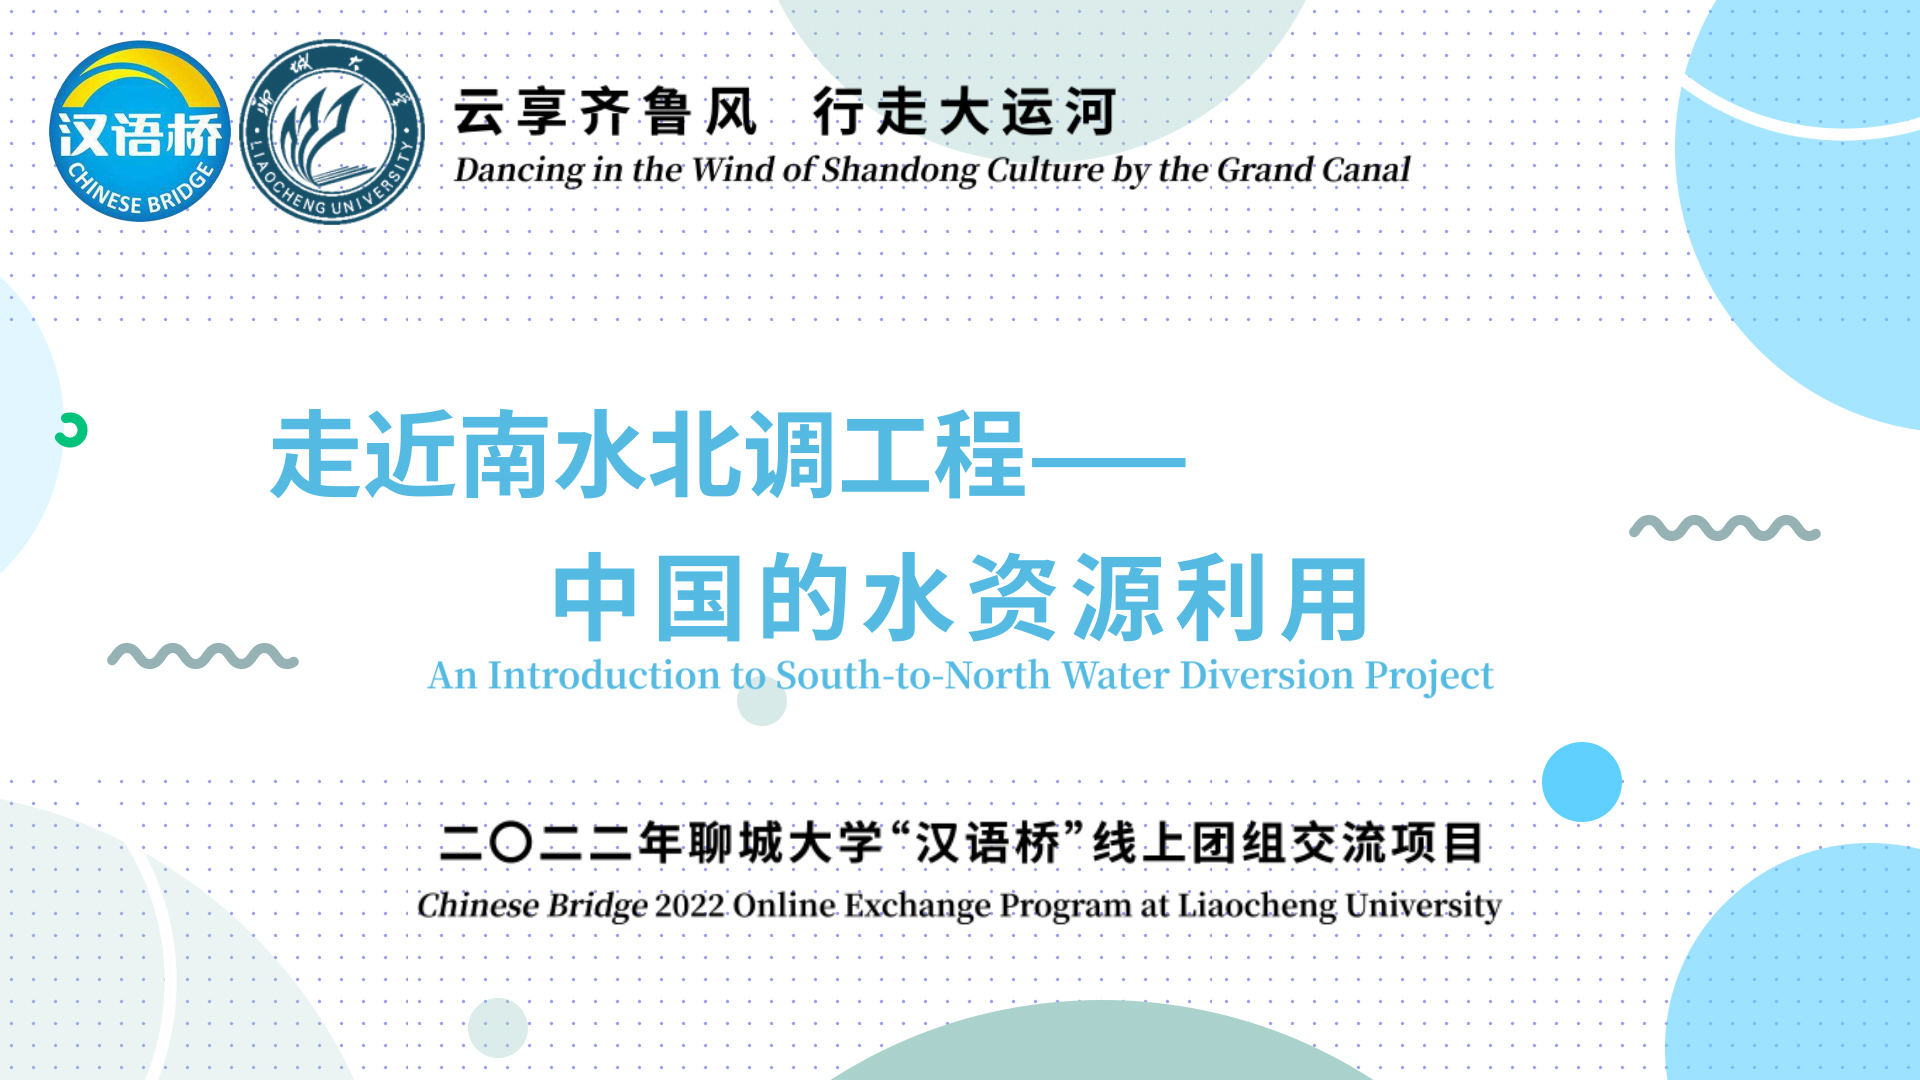 An Introduction to South-to-North Water Diversion Project